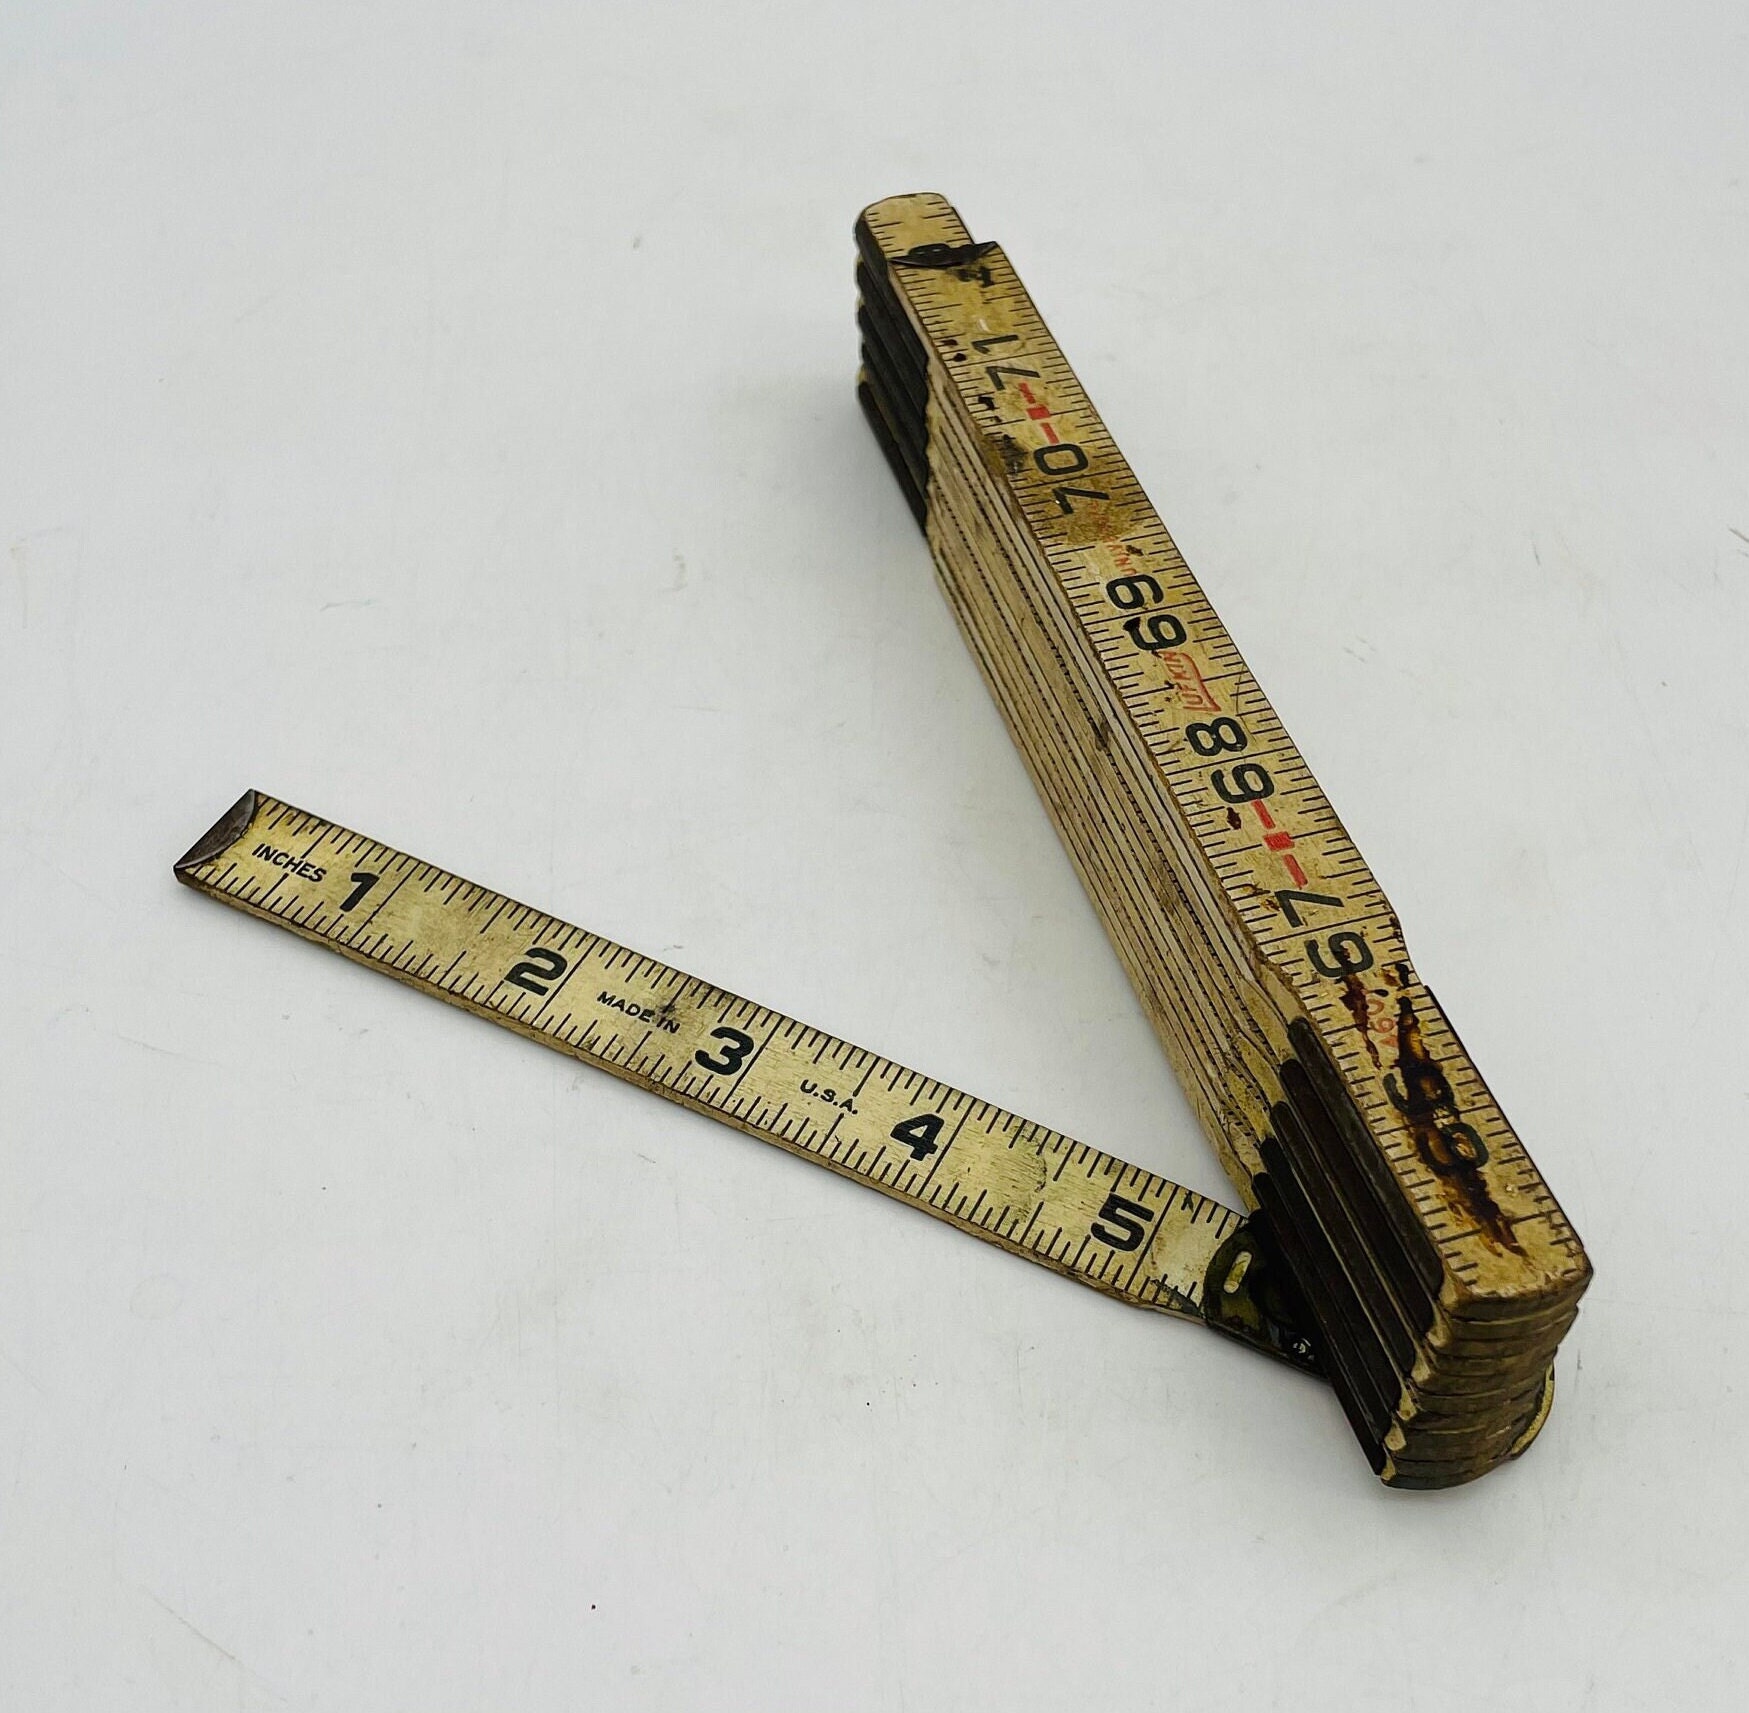 Vintage Folding Yard Stick Ruler, Wood and Metal Hinge, Made in USA  Industrial Tool, Antique Tool, Steam Punk, Stanley X226, Stanguard -   Israel